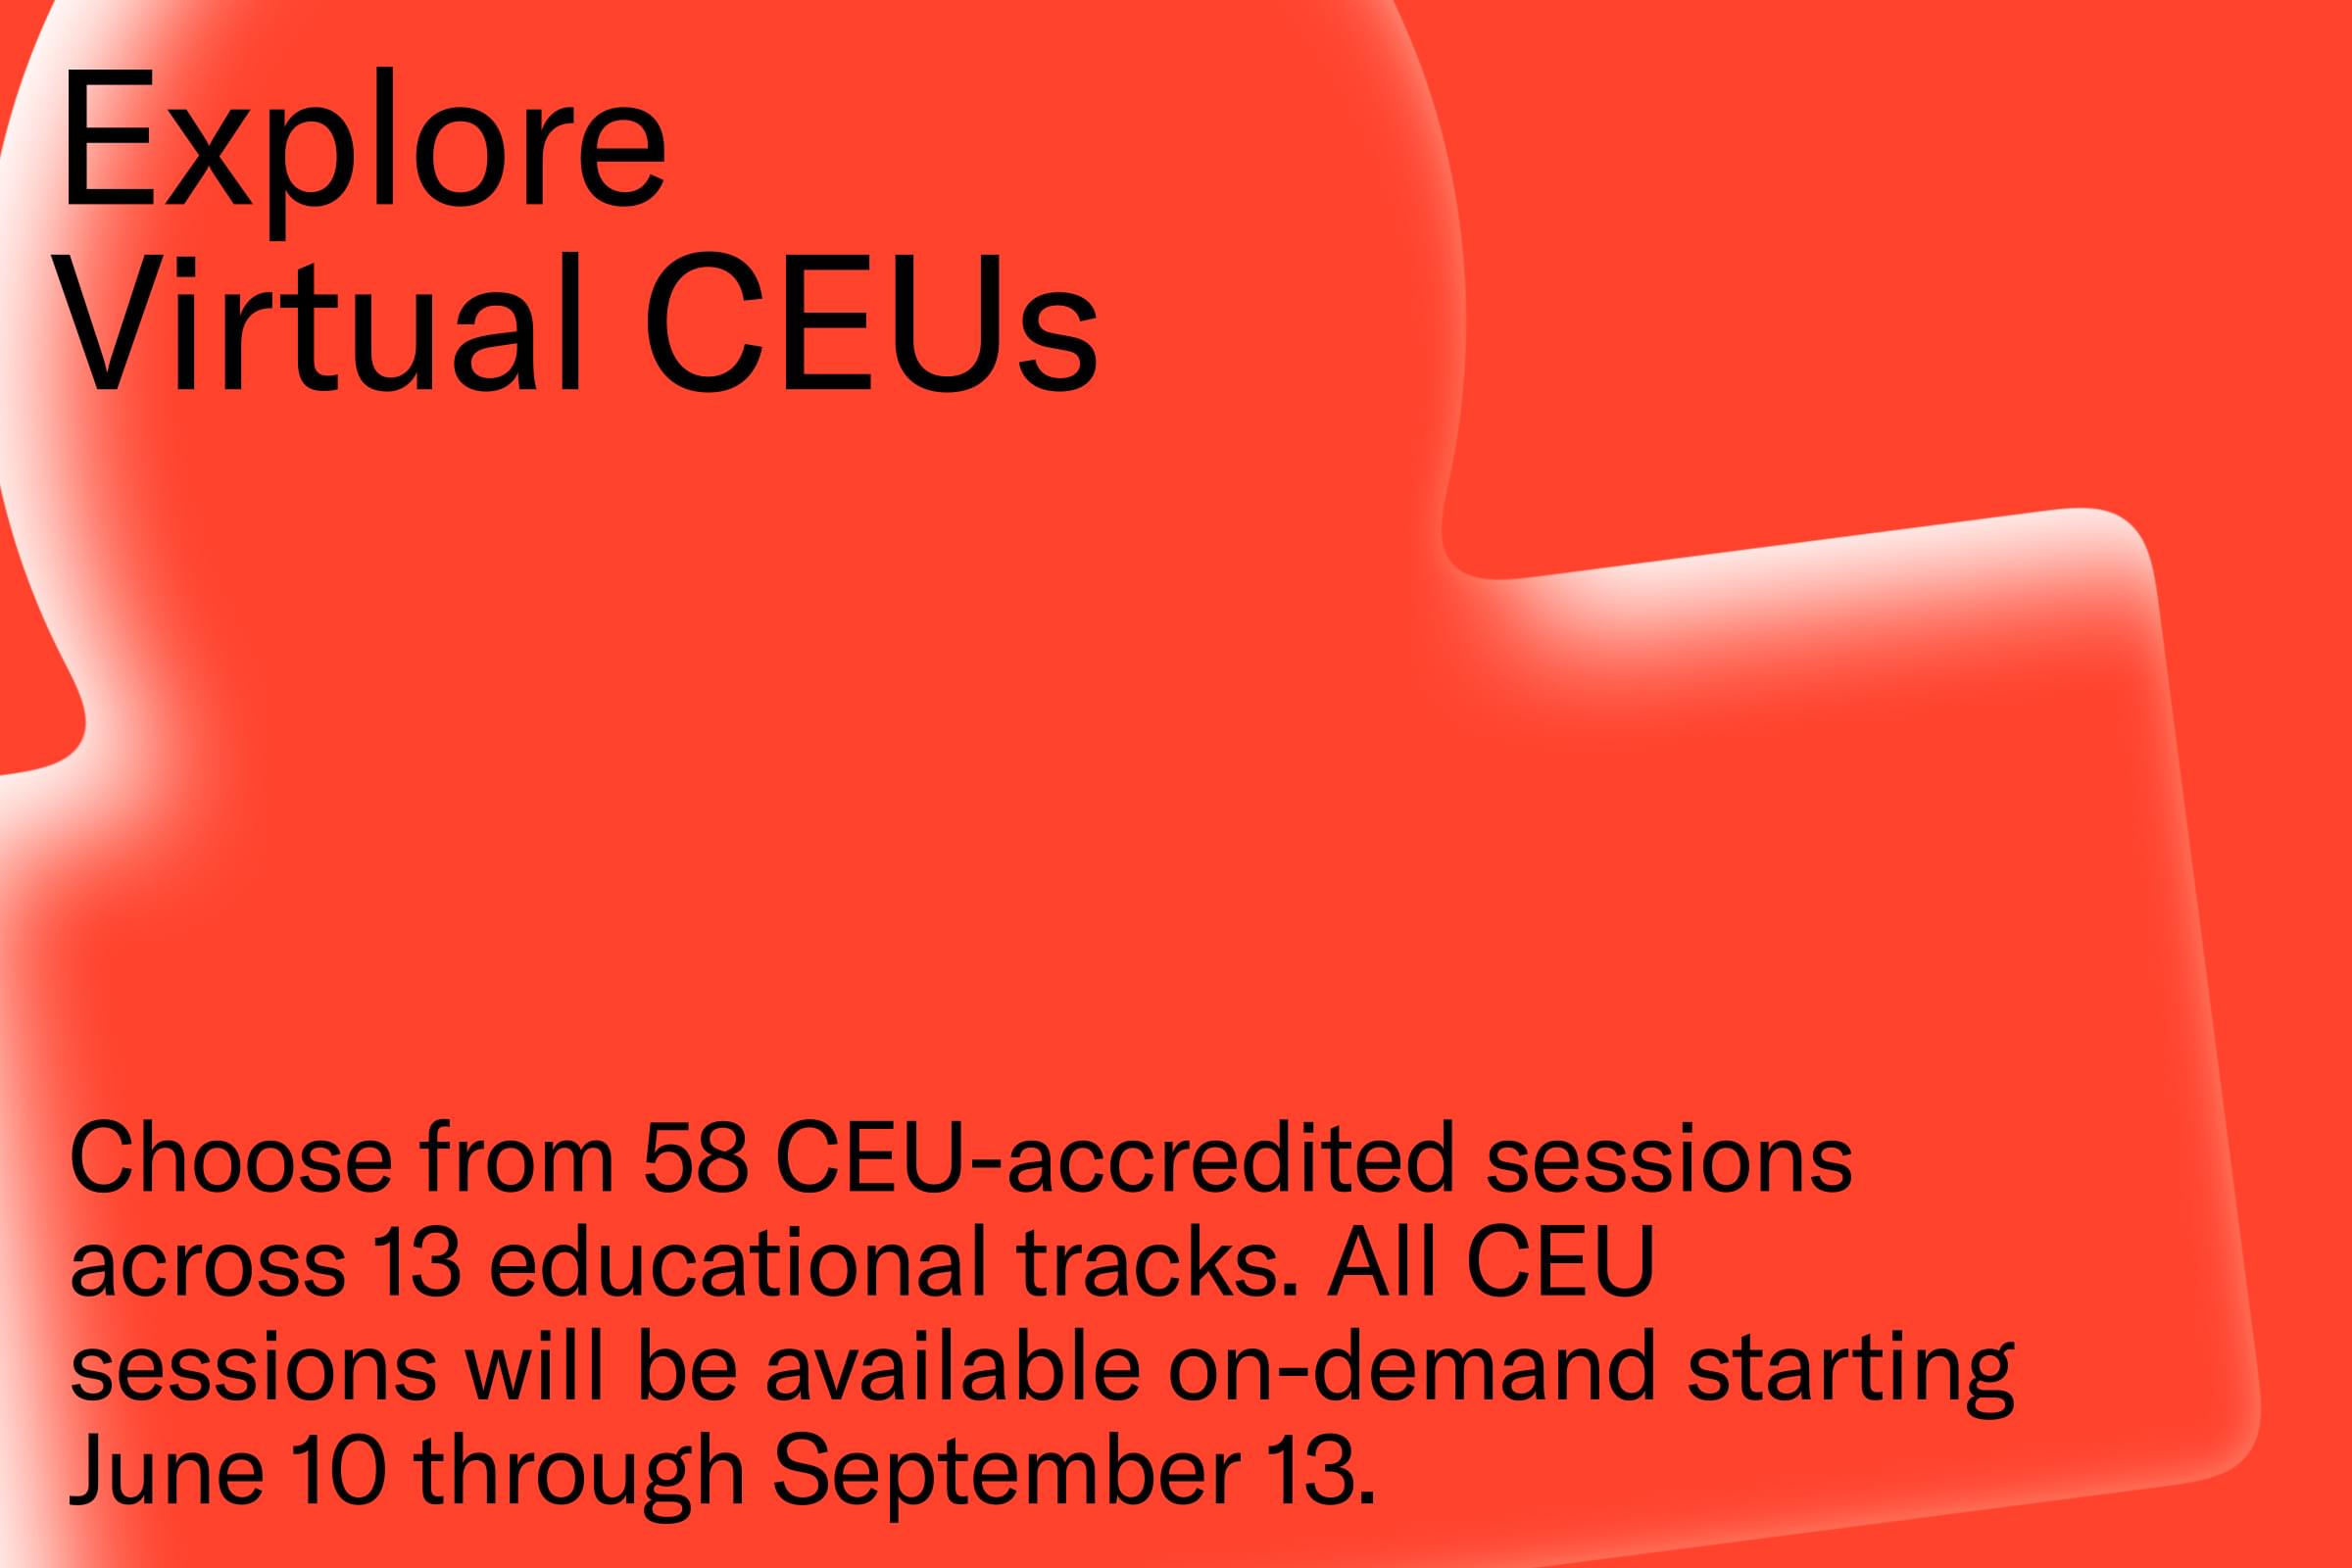 Explore Virtual CEUs - Choose from 58 CEU-accredited sessions across 13 educational tracks. All CEU sessions will be available on-demand starting June 10 through September 13.